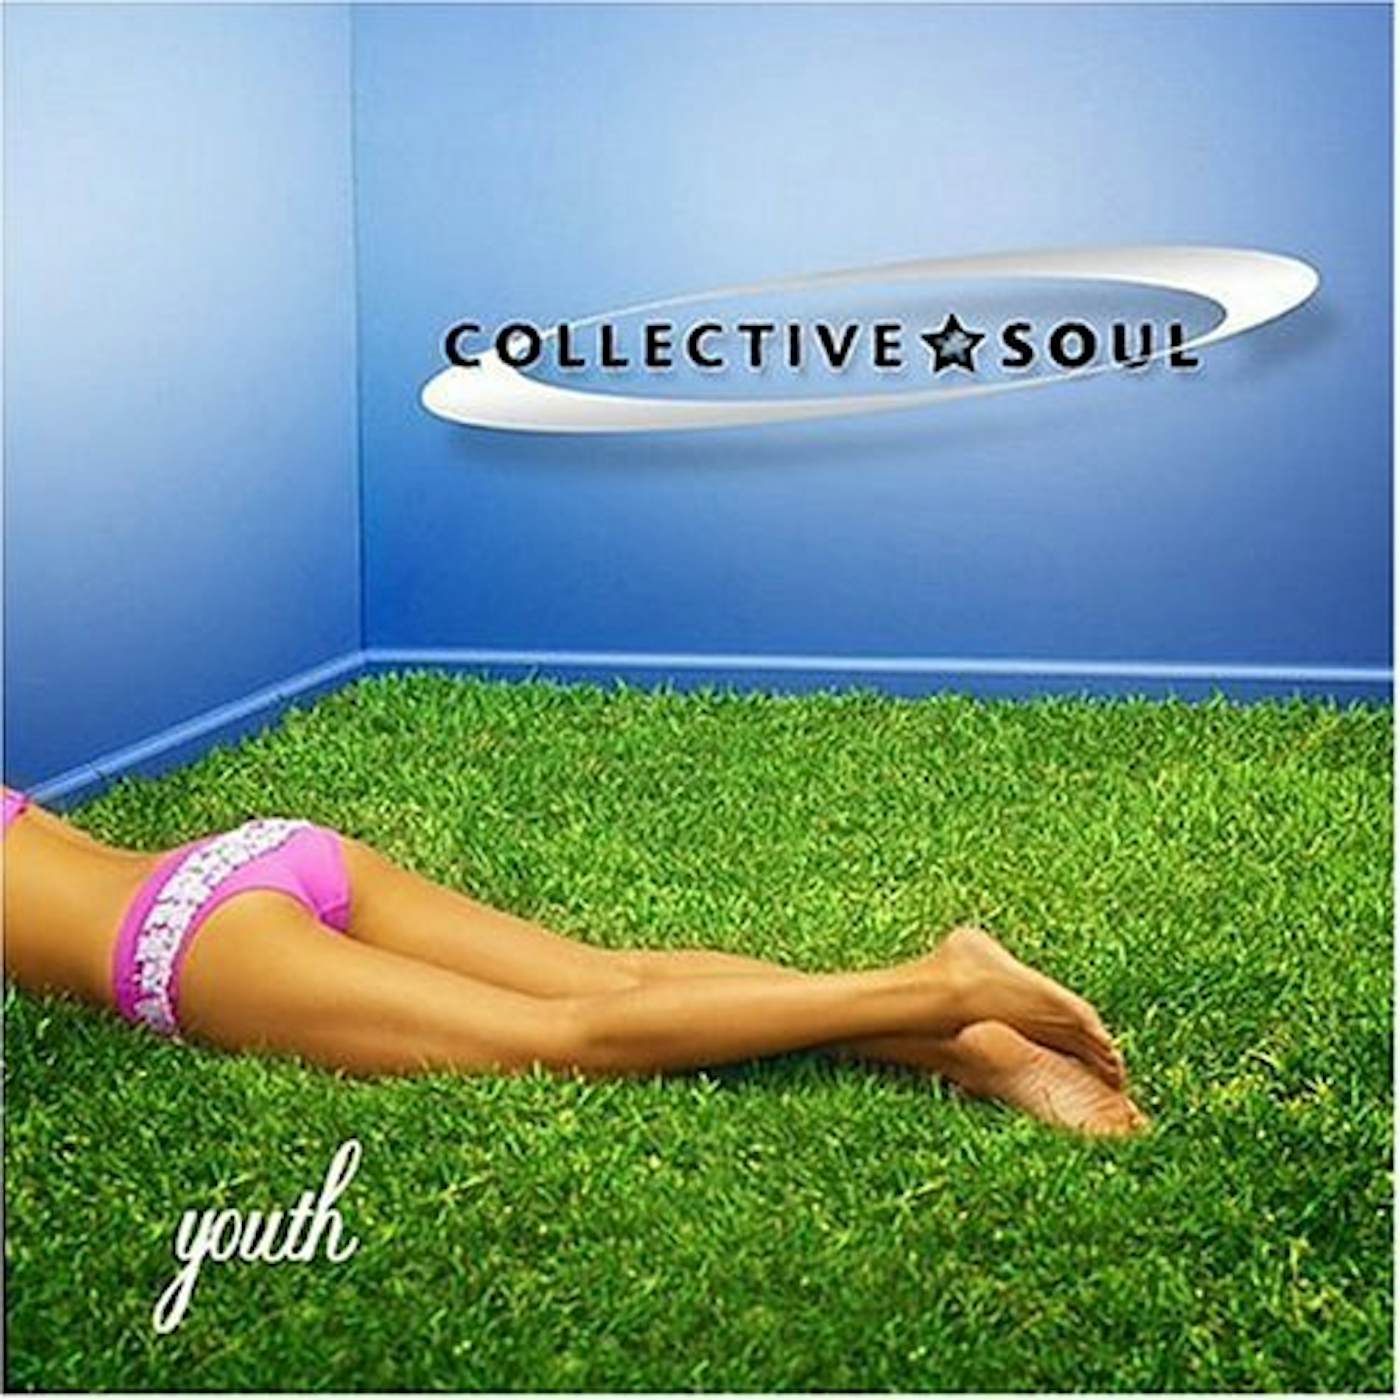 Collective Soul YOUTH CD